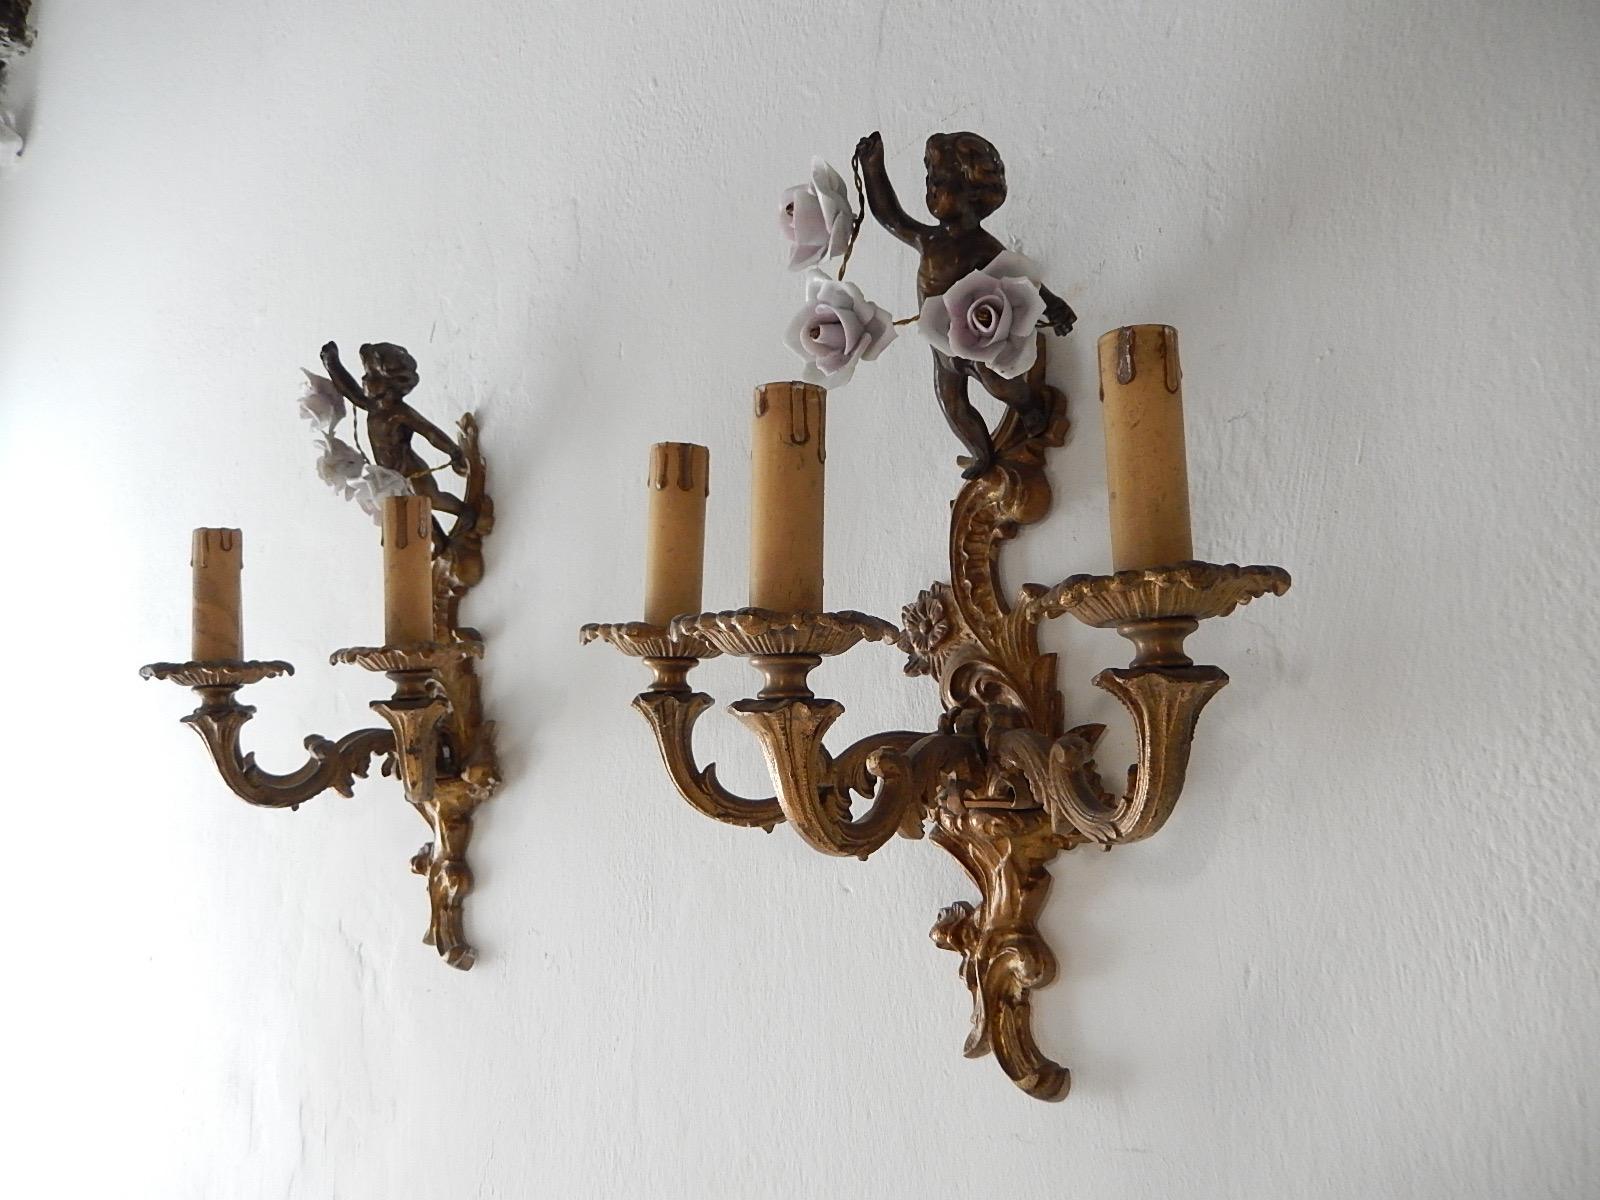 Housing 3 lights each. Will be re-wired with appropriate sockets for country and ready to hang! Heavy cast bronze with great patina, Adorning cherubs on top holding 3 pink roses. Great details of flowers in bronze. Free priority UPS shipping from